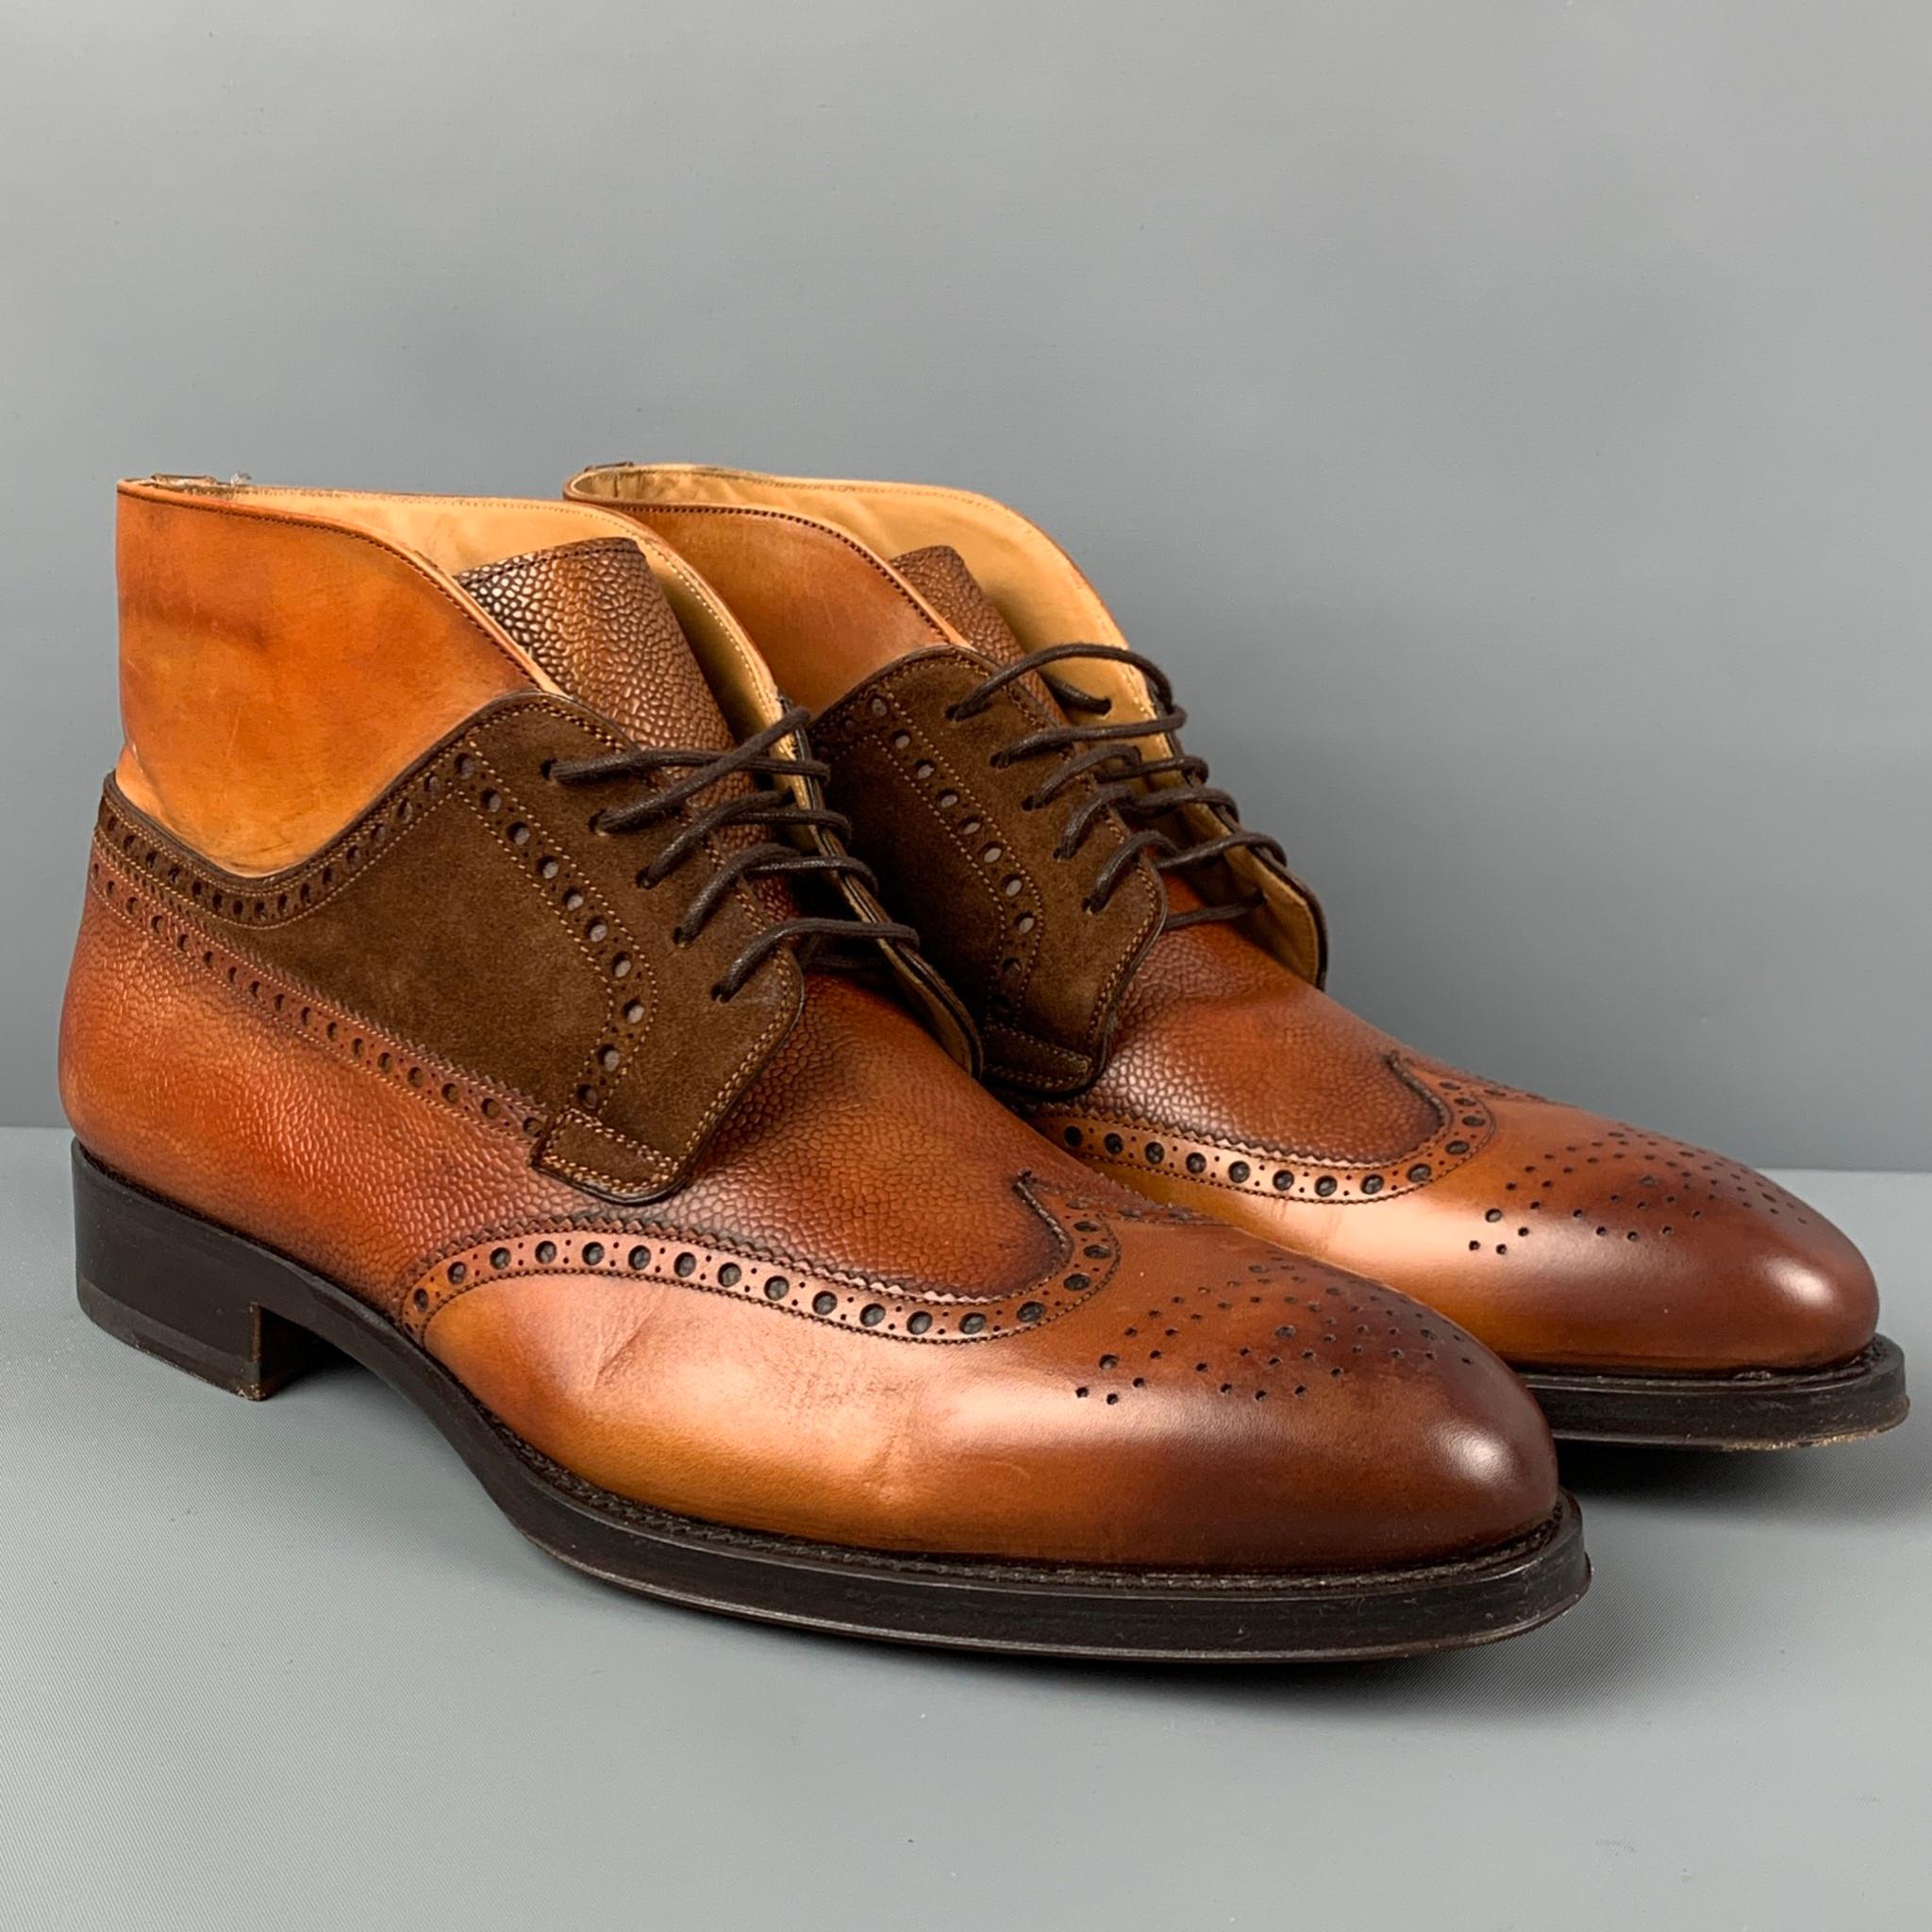 PAUL STUART boots comes in a tan & brown leather featuring a wingtip style, suede trim, and a lace up closure. Made in Spain. 

Very Good Pre-Owned Condition.
Marked: 43.5

Measurements:

Length: 12.5 in.
Width: 4.5 in.
Height: 5 in. 